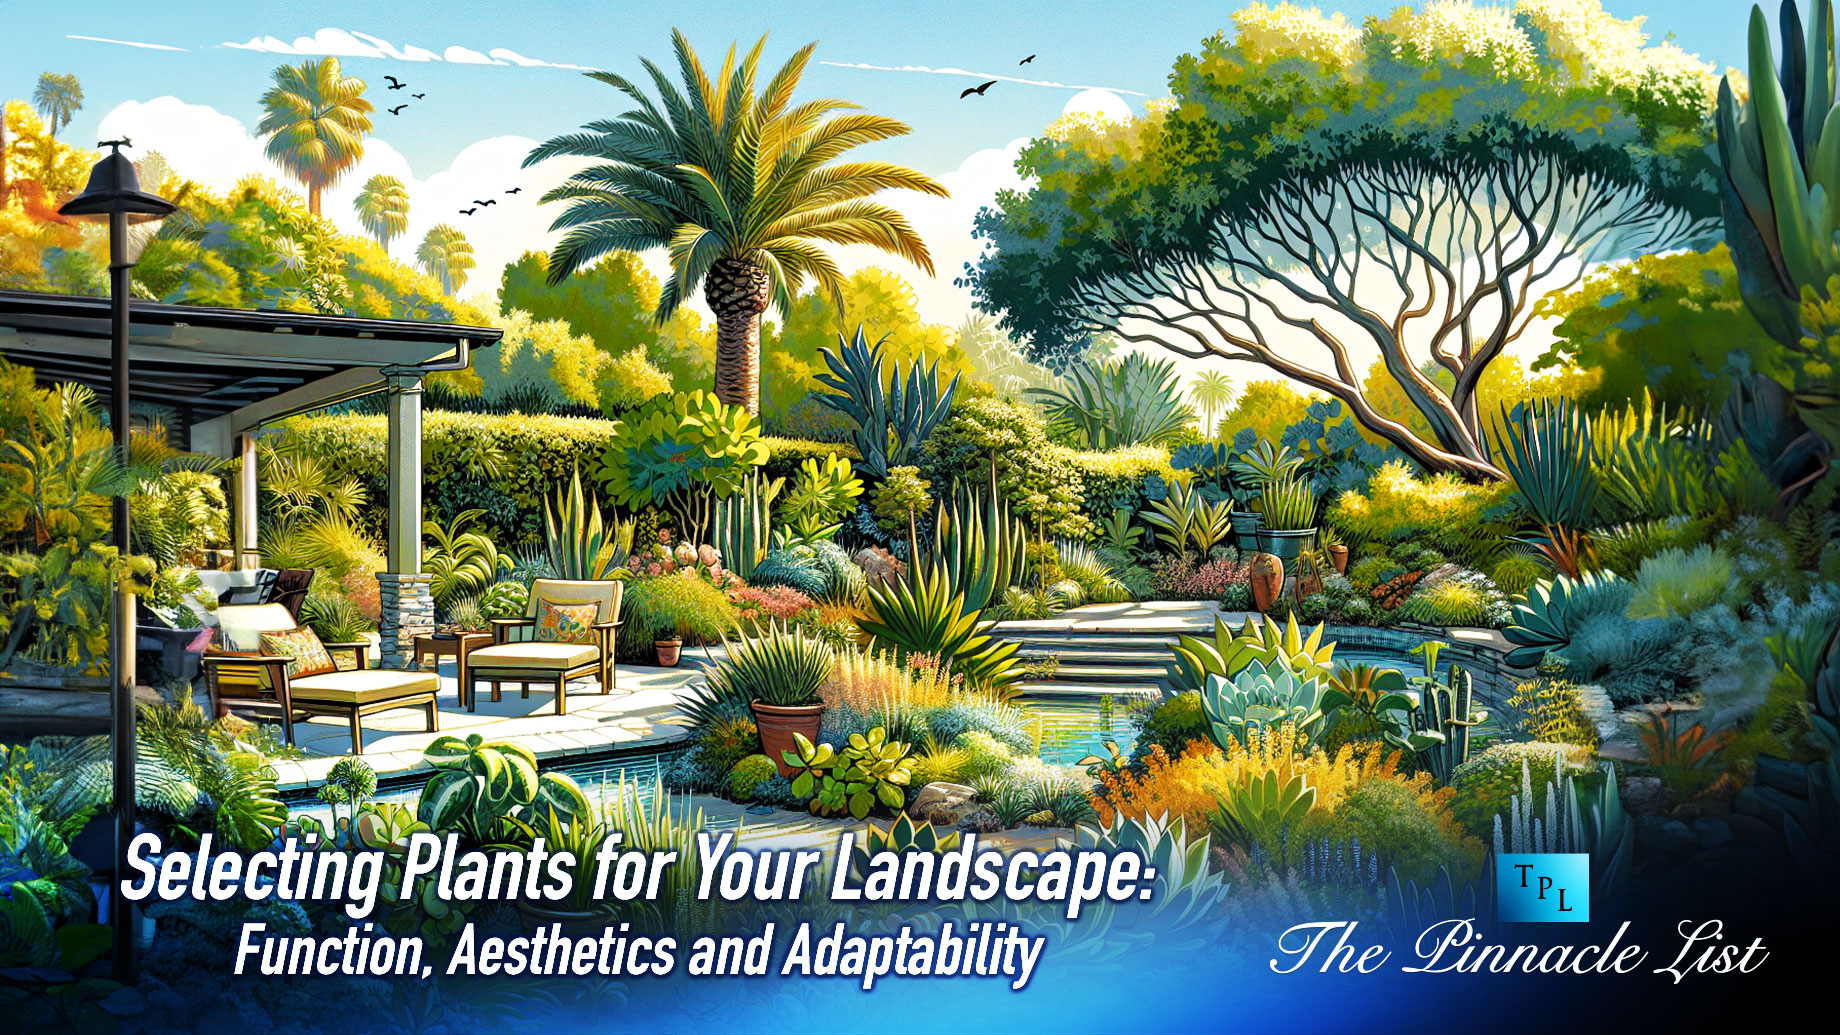 Selecting Plants for Your Landscape: Function, Aesthetics and Adaptability